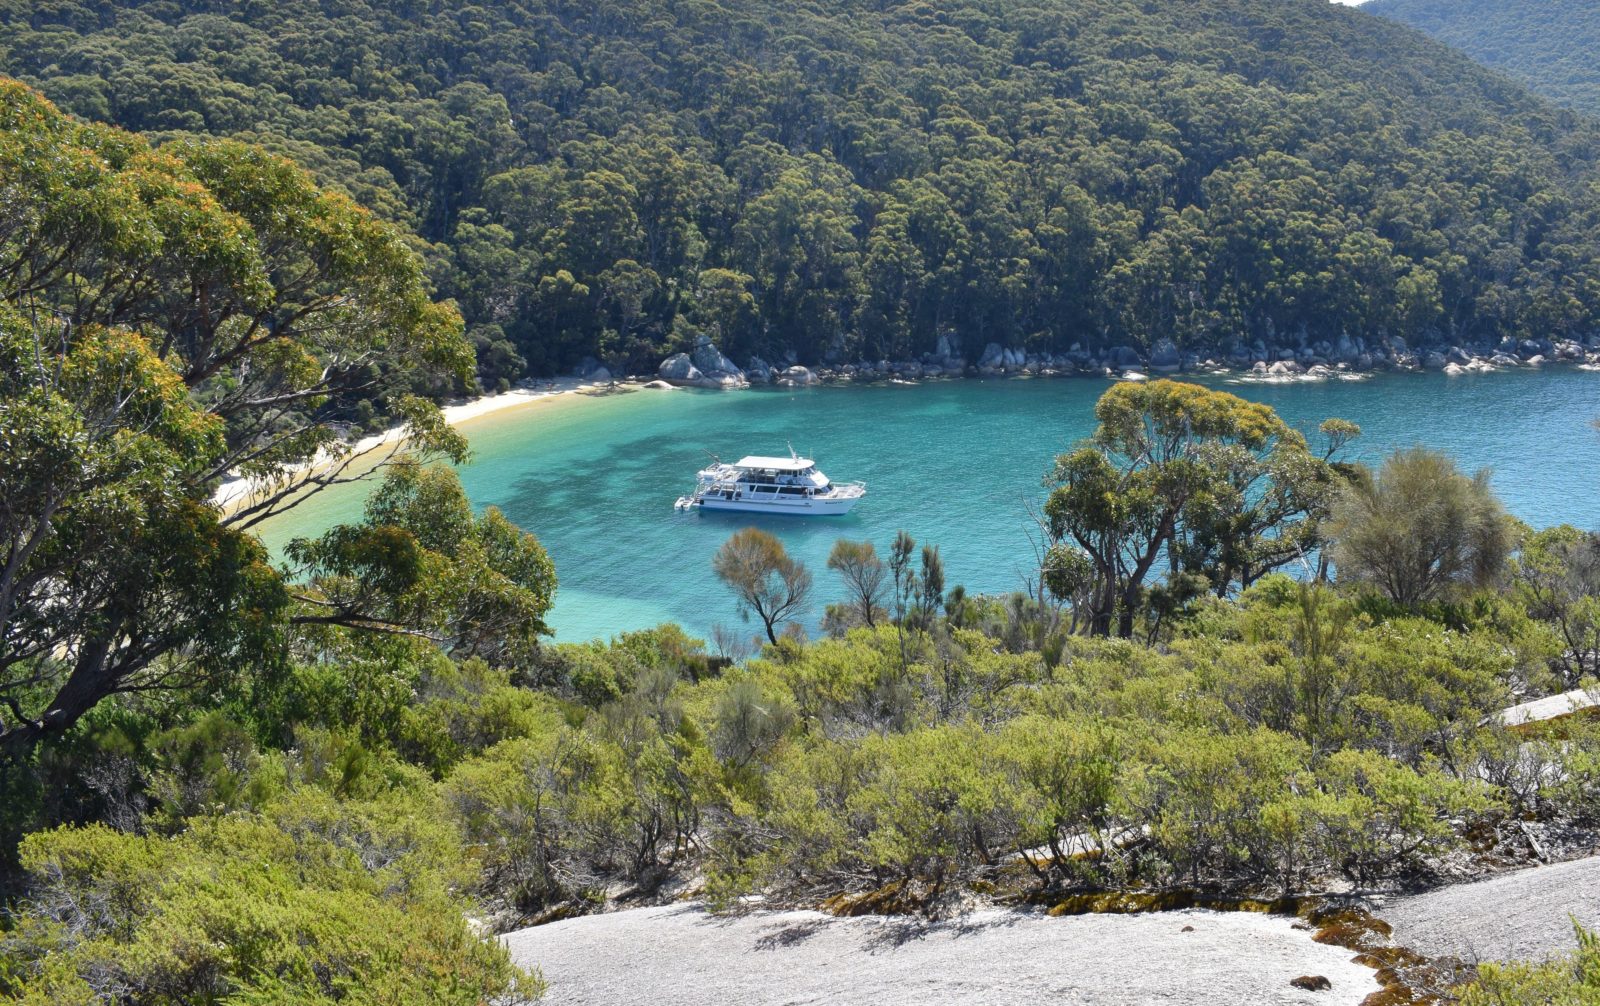 Anchoring in Refuge Cove